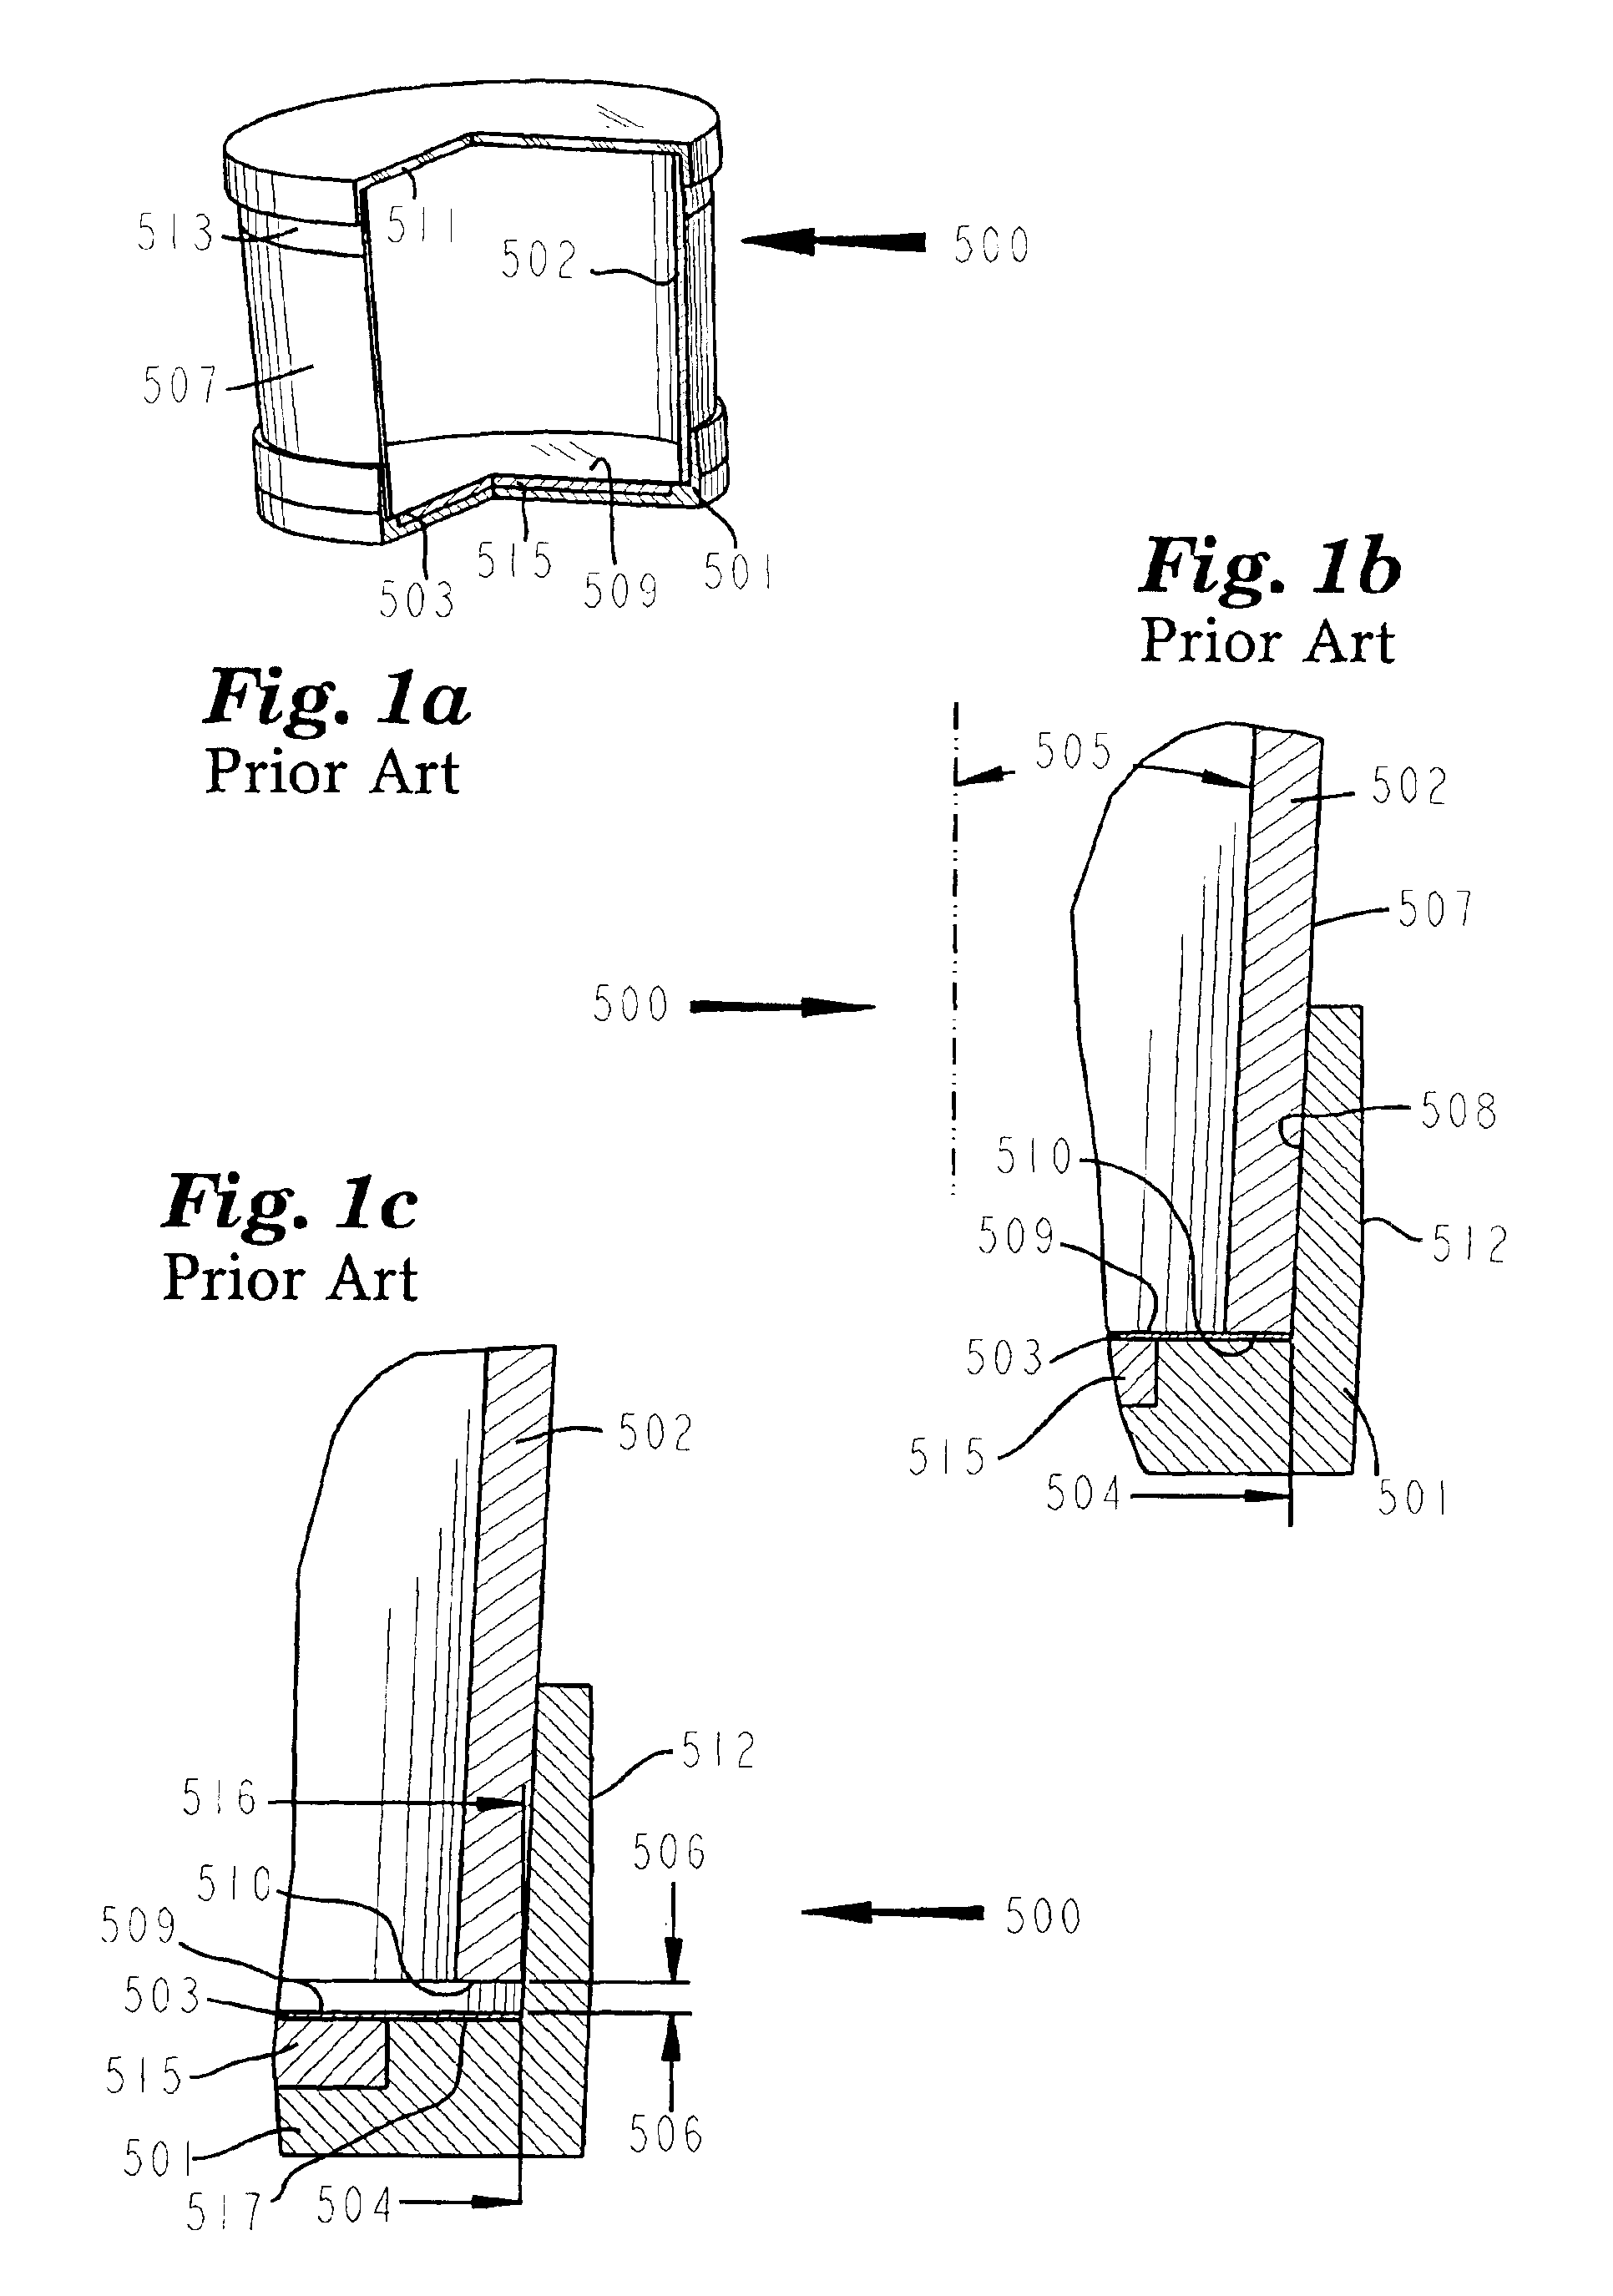 Disposable vacuum filtration apparatus capable of detecting microorganisms and particulates in liquid samples